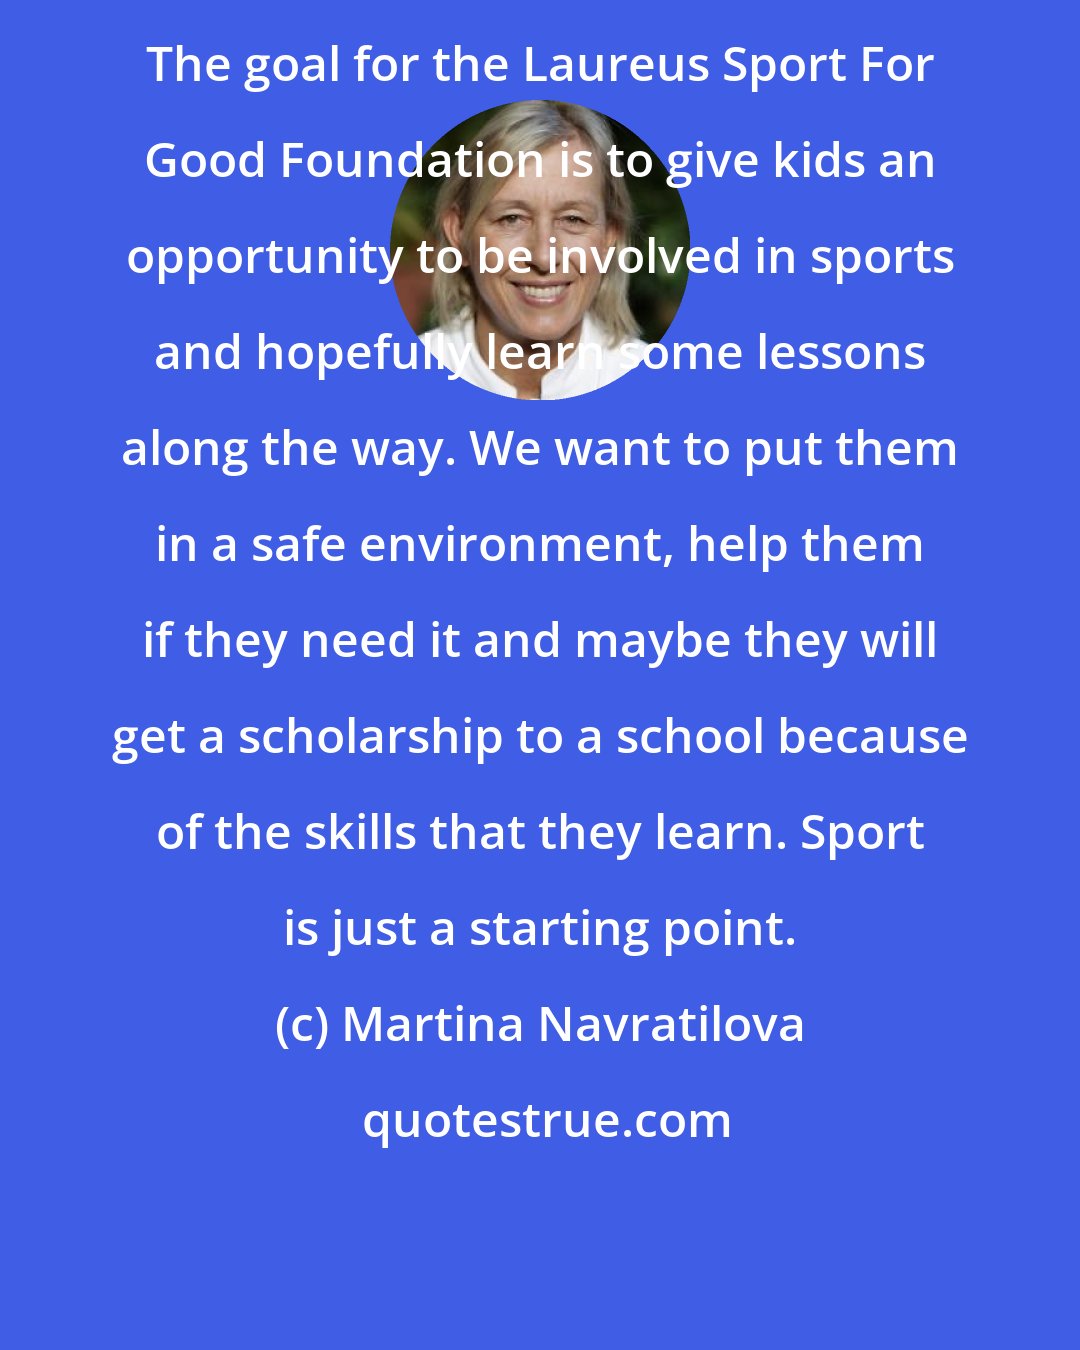 Martina Navratilova: The goal for the Laureus Sport For Good Foundation is to give kids an opportunity to be involved in sports and hopefully learn some lessons along the way. We want to put them in a safe environment, help them if they need it and maybe they will get a scholarship to a school because of the skills that they learn. Sport is just a starting point.